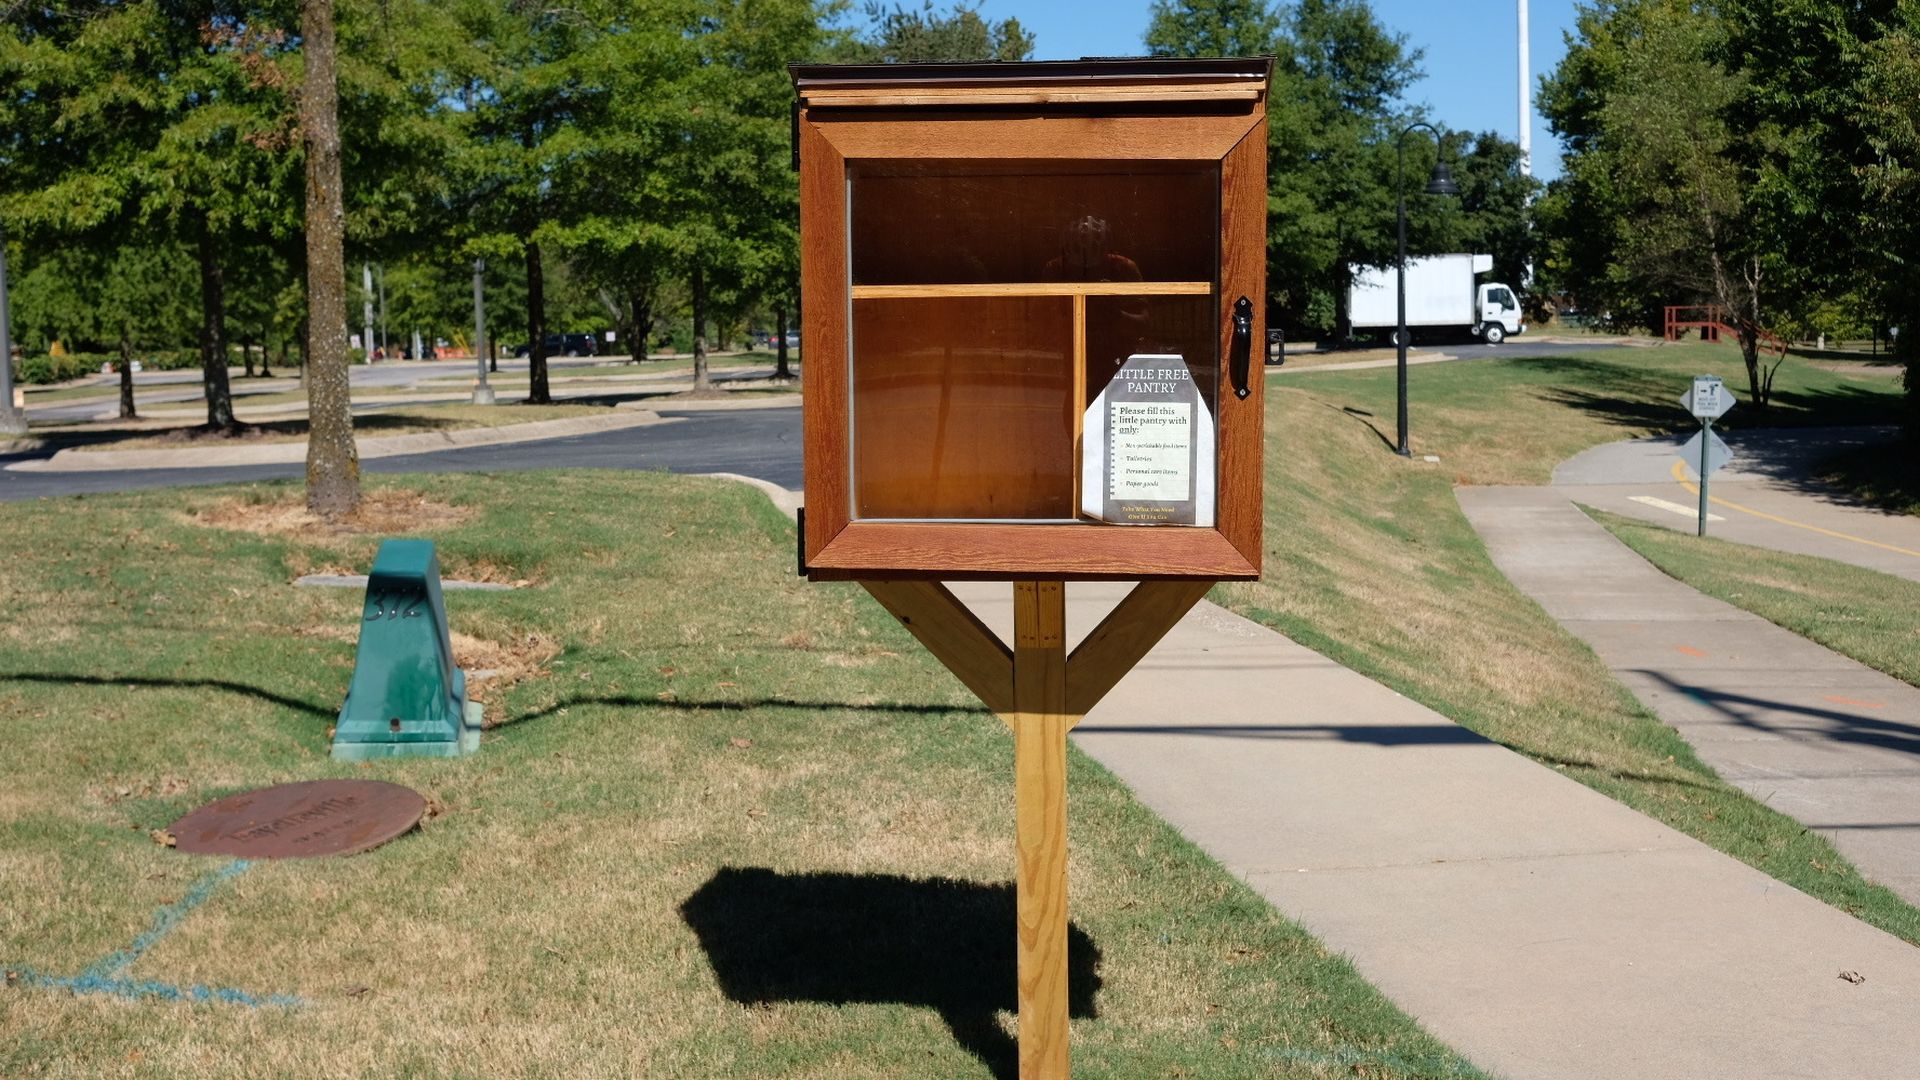 Photo of a new Little Free Pantry with no food inside. 